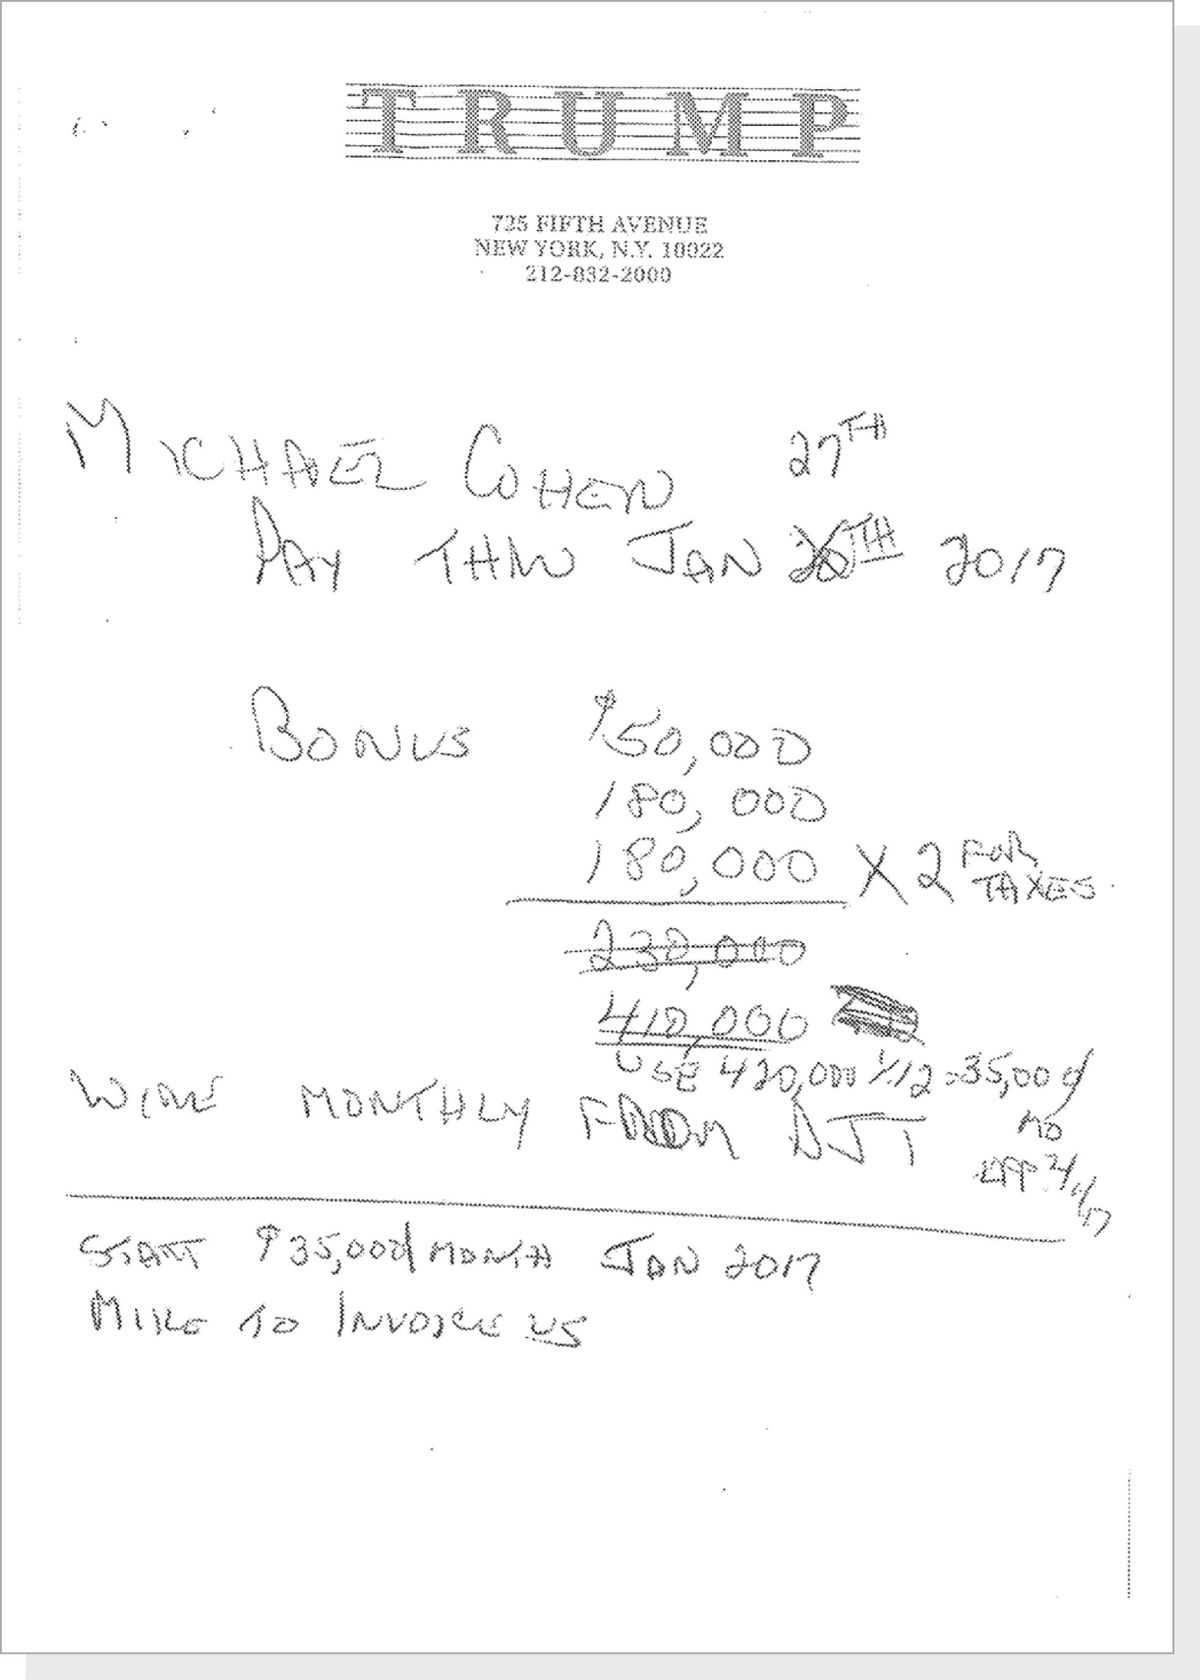 Exhibit 36 shows Jeffrey McConney’s notes on the plan he discussed with Allen Weisselberg to reimburse Cohen. 